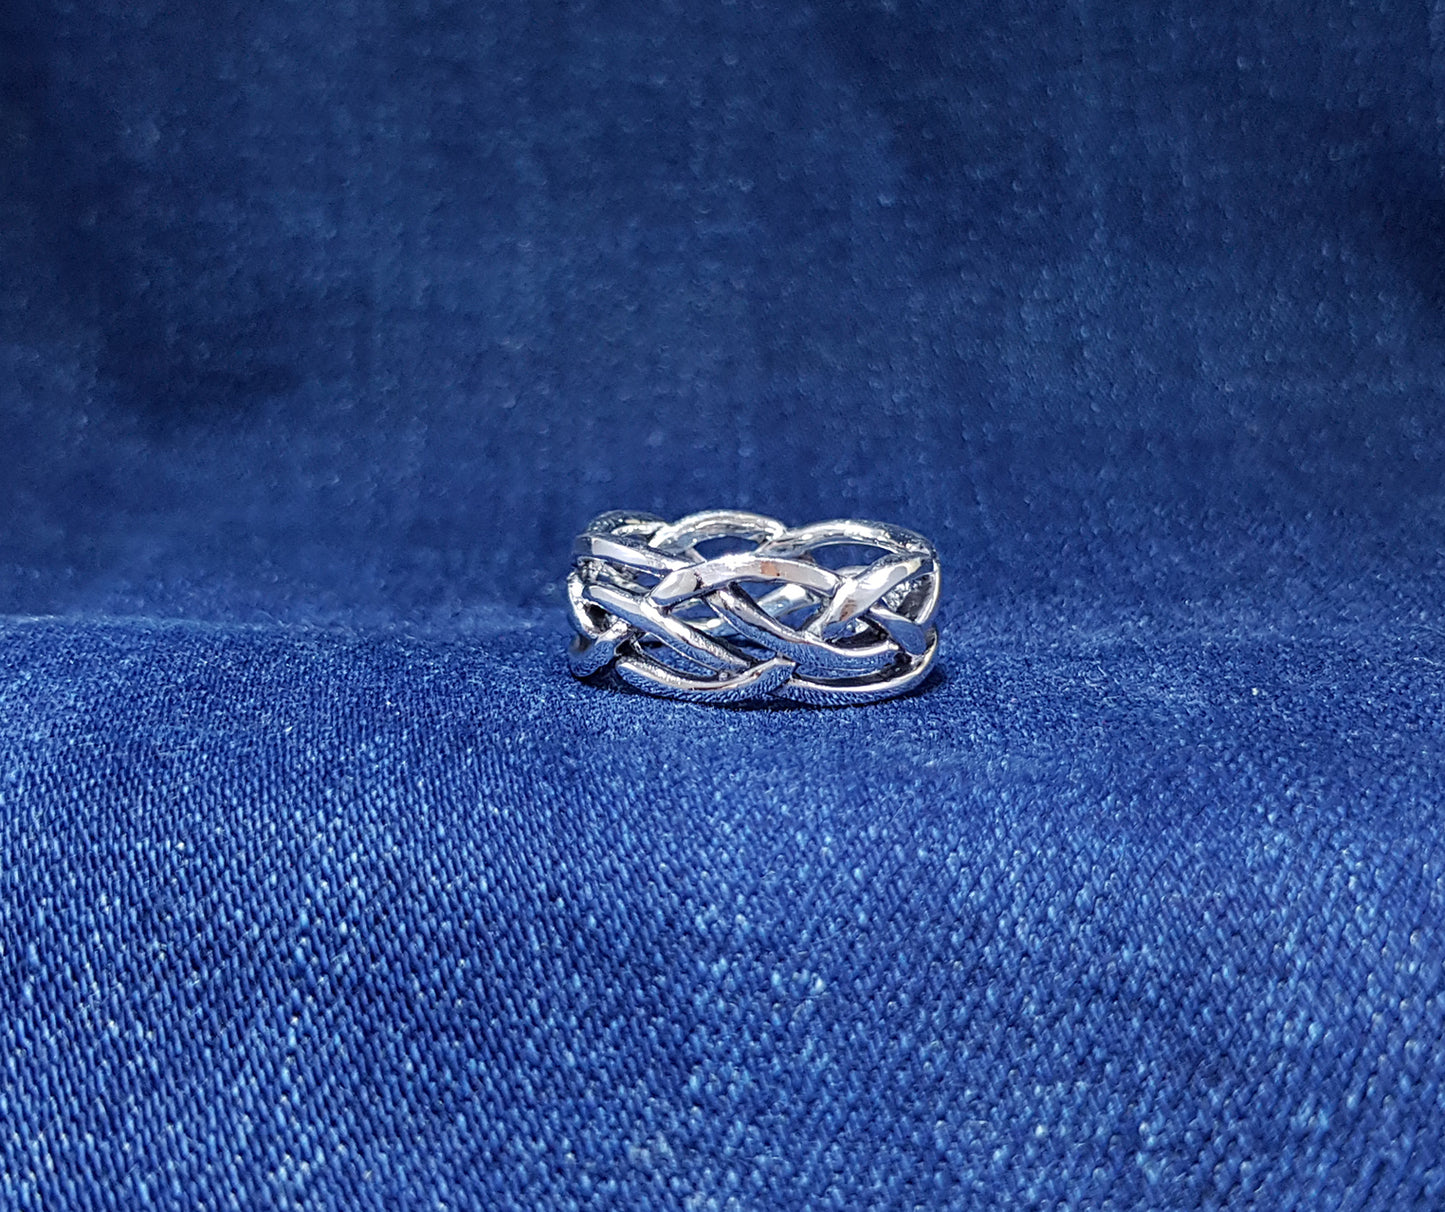 A broad Celtic weave ring displaying an intricate and interlacing pattern inspired by Celtic artistry.